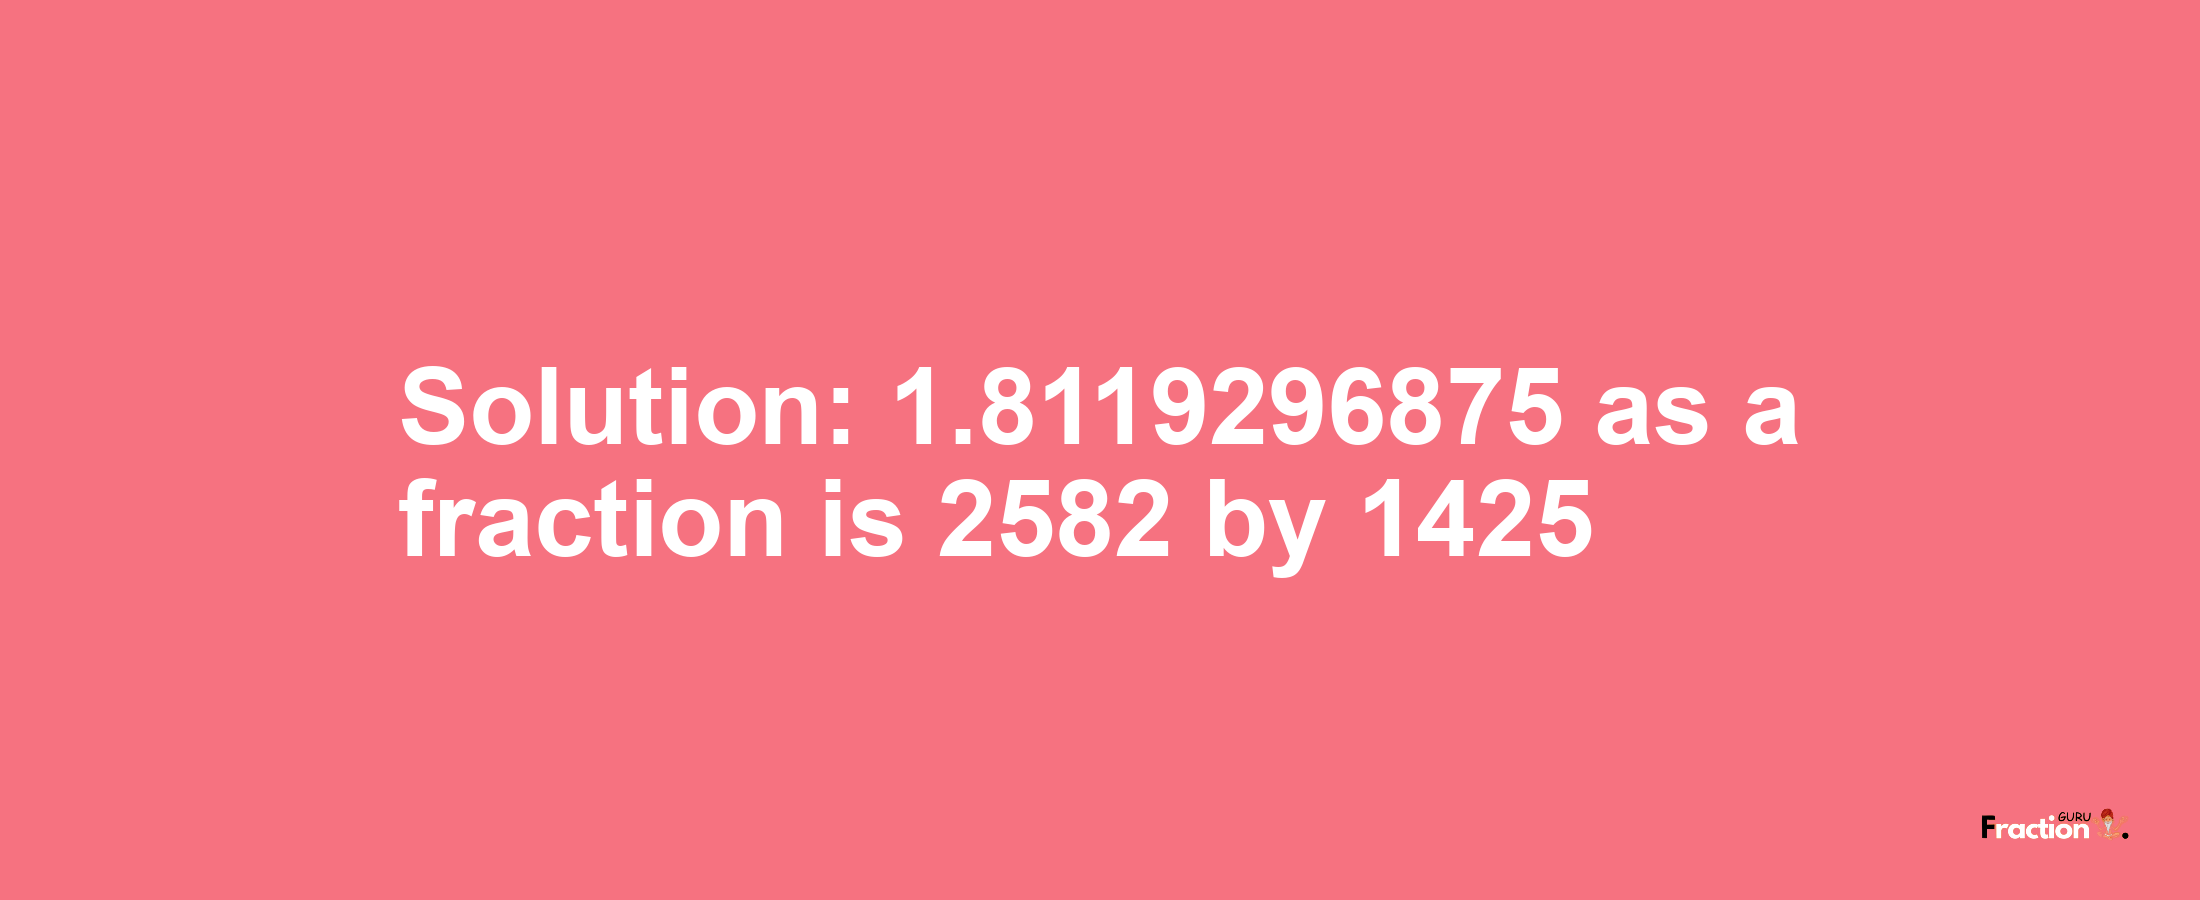 Solution:1.8119296875 as a fraction is 2582/1425